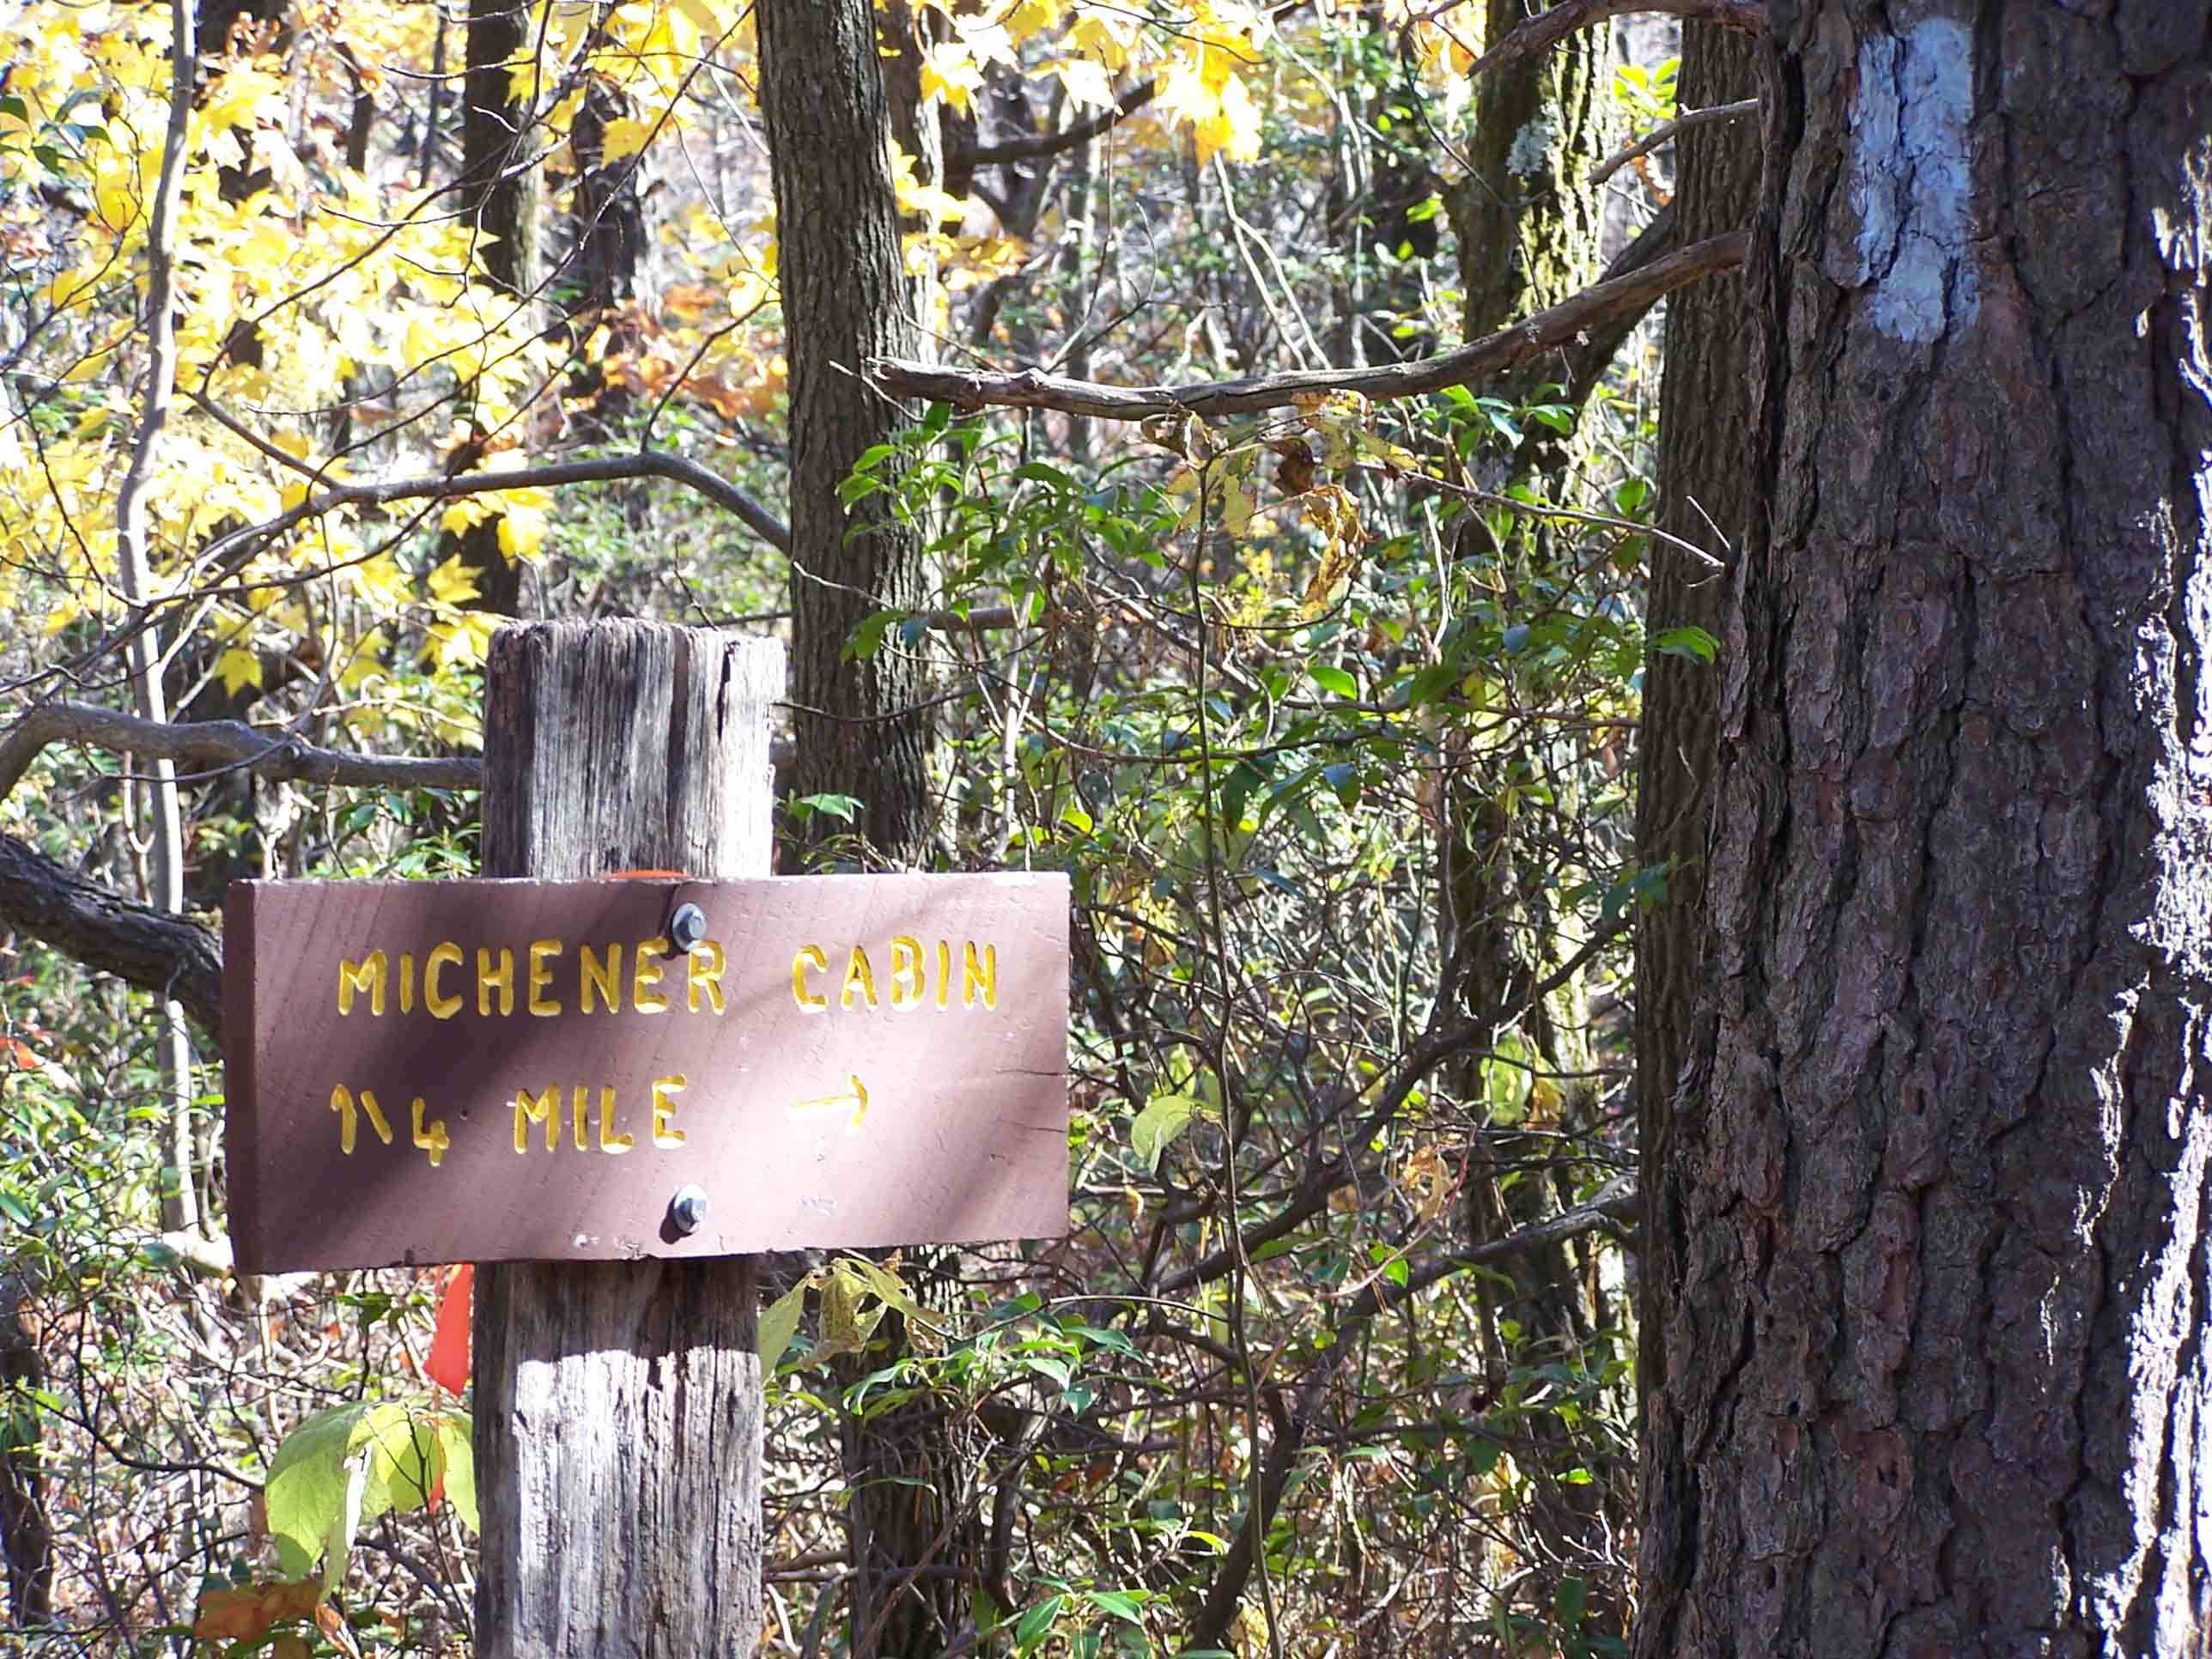 mm 6.5 blue blazed trail to Michner cabin. Courtesy at@rohland.org